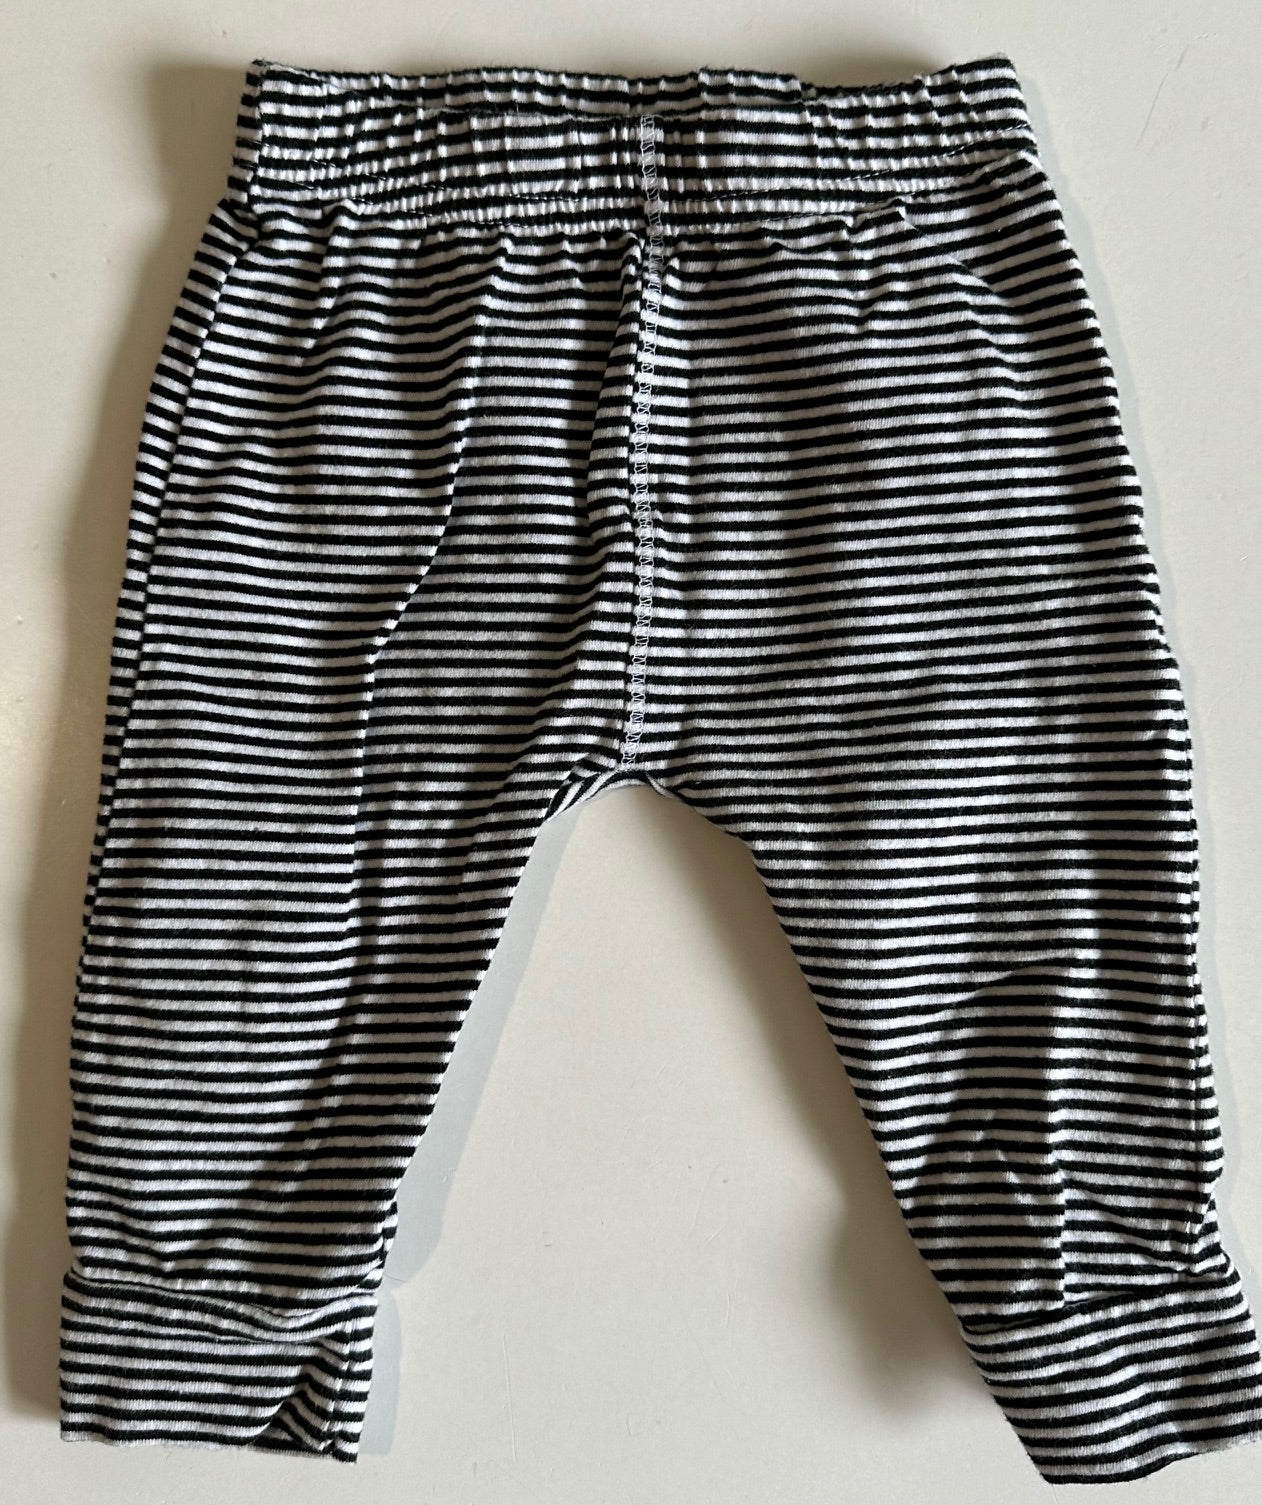 Simple Joys, Black and White Striped Pants - 6-9 Months